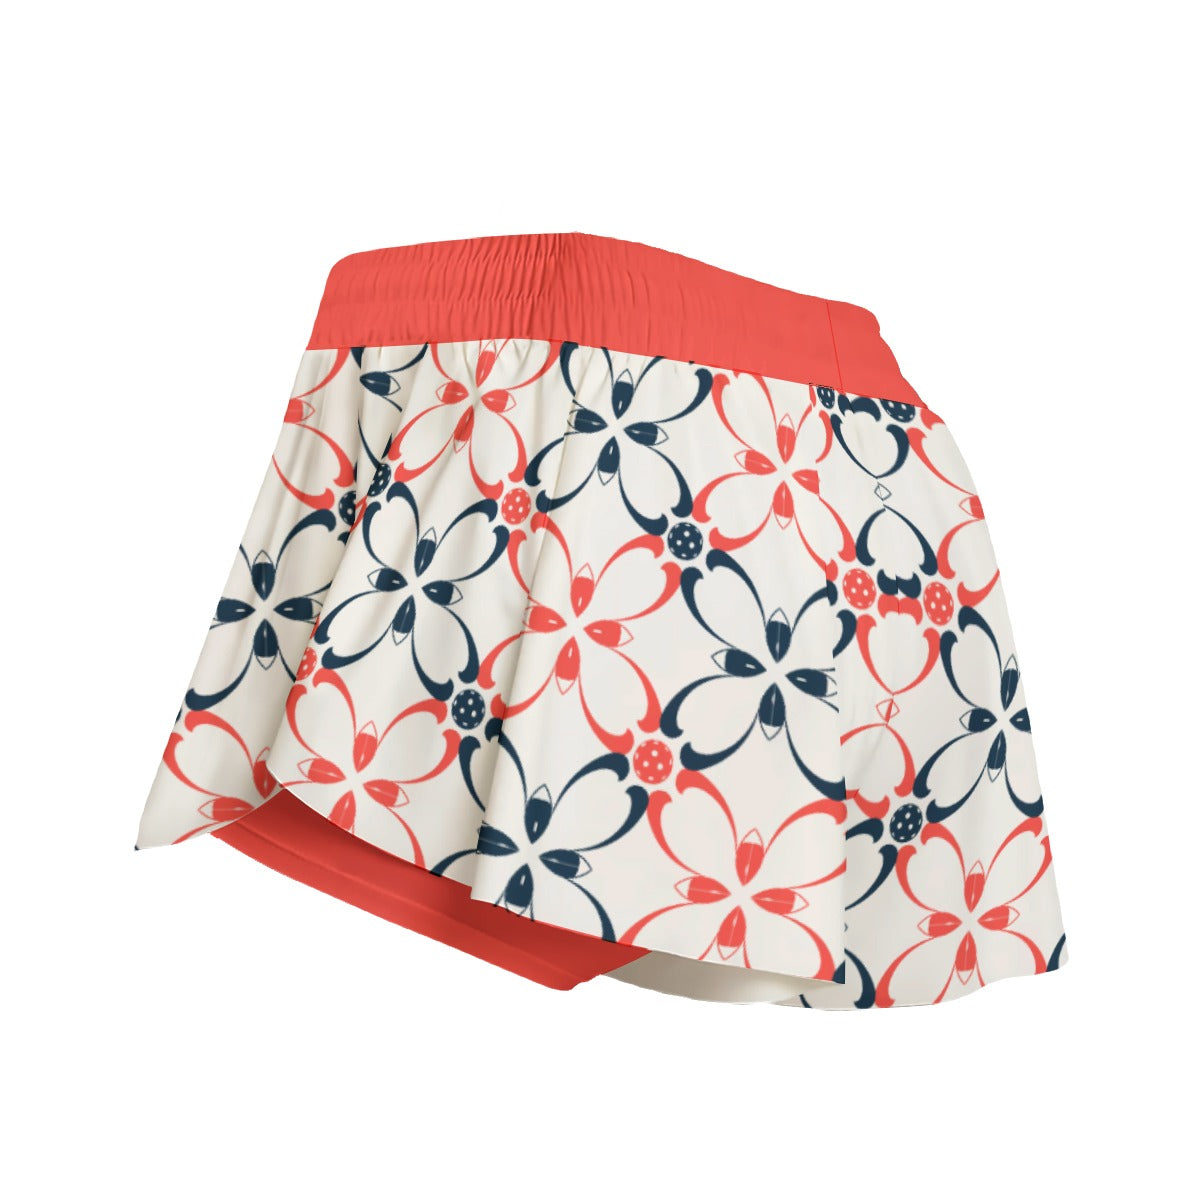 Van - White/Coral - Petals - Pickleball Women's Sport Culottes with Pockets by Dizzy Pickle